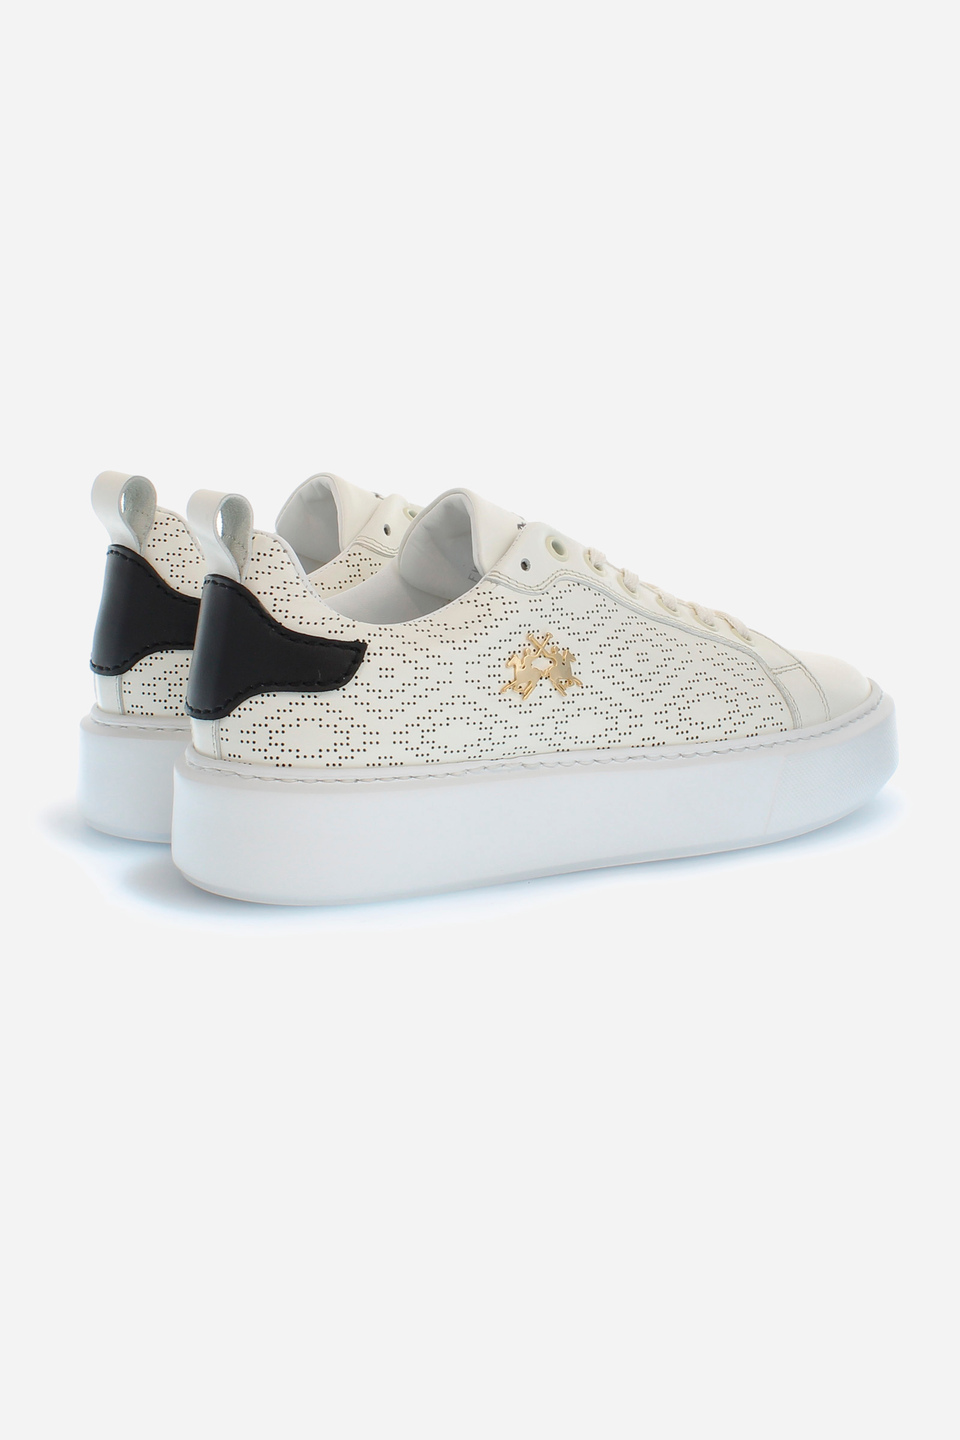 Women's trainers in perforated leather | La Martina - Official Online Shop